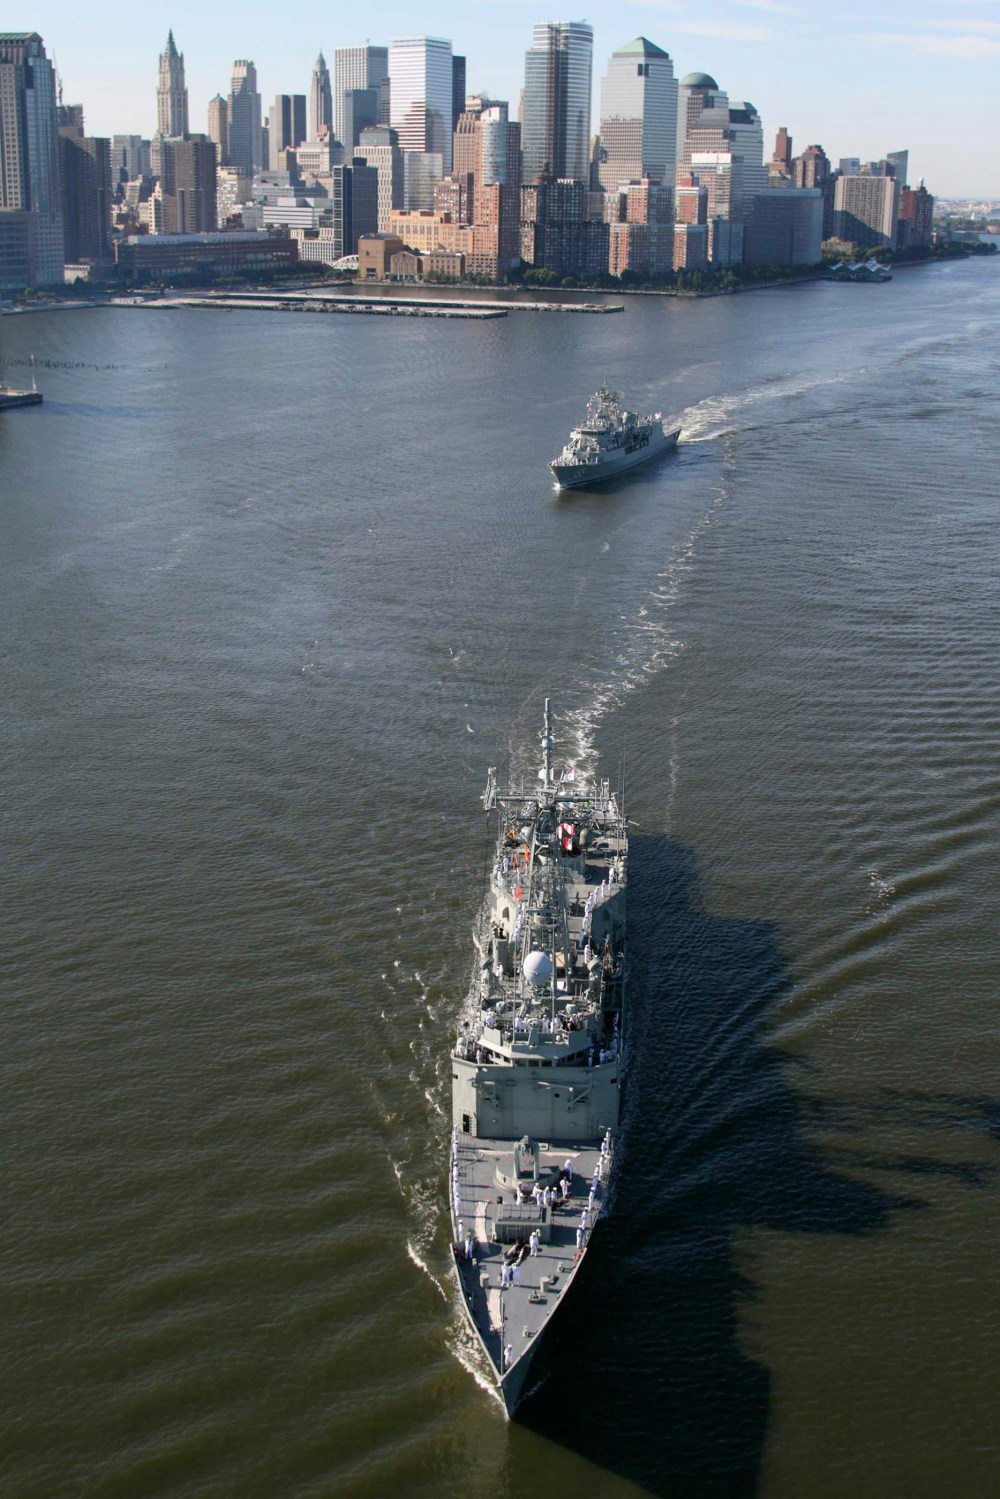 Two Australian Navy warships, the HMAS Sydney (front) and HMAS Ballarat arrive in New York harbor, July 19, 2009. The Australian ships and more than 400 sailors will visit Manhattan as part of of a six month international deployment. REUTERS/Trevor Collens/Pool (UNITED STATES MILITARY POLITICS IMAGES OF THE DAY) FOR EDITORIAL USE ONLY. NOT FOR SALE FOR MARKETING OR ADVERTISING CAMPAIGNS - RTR25TWX